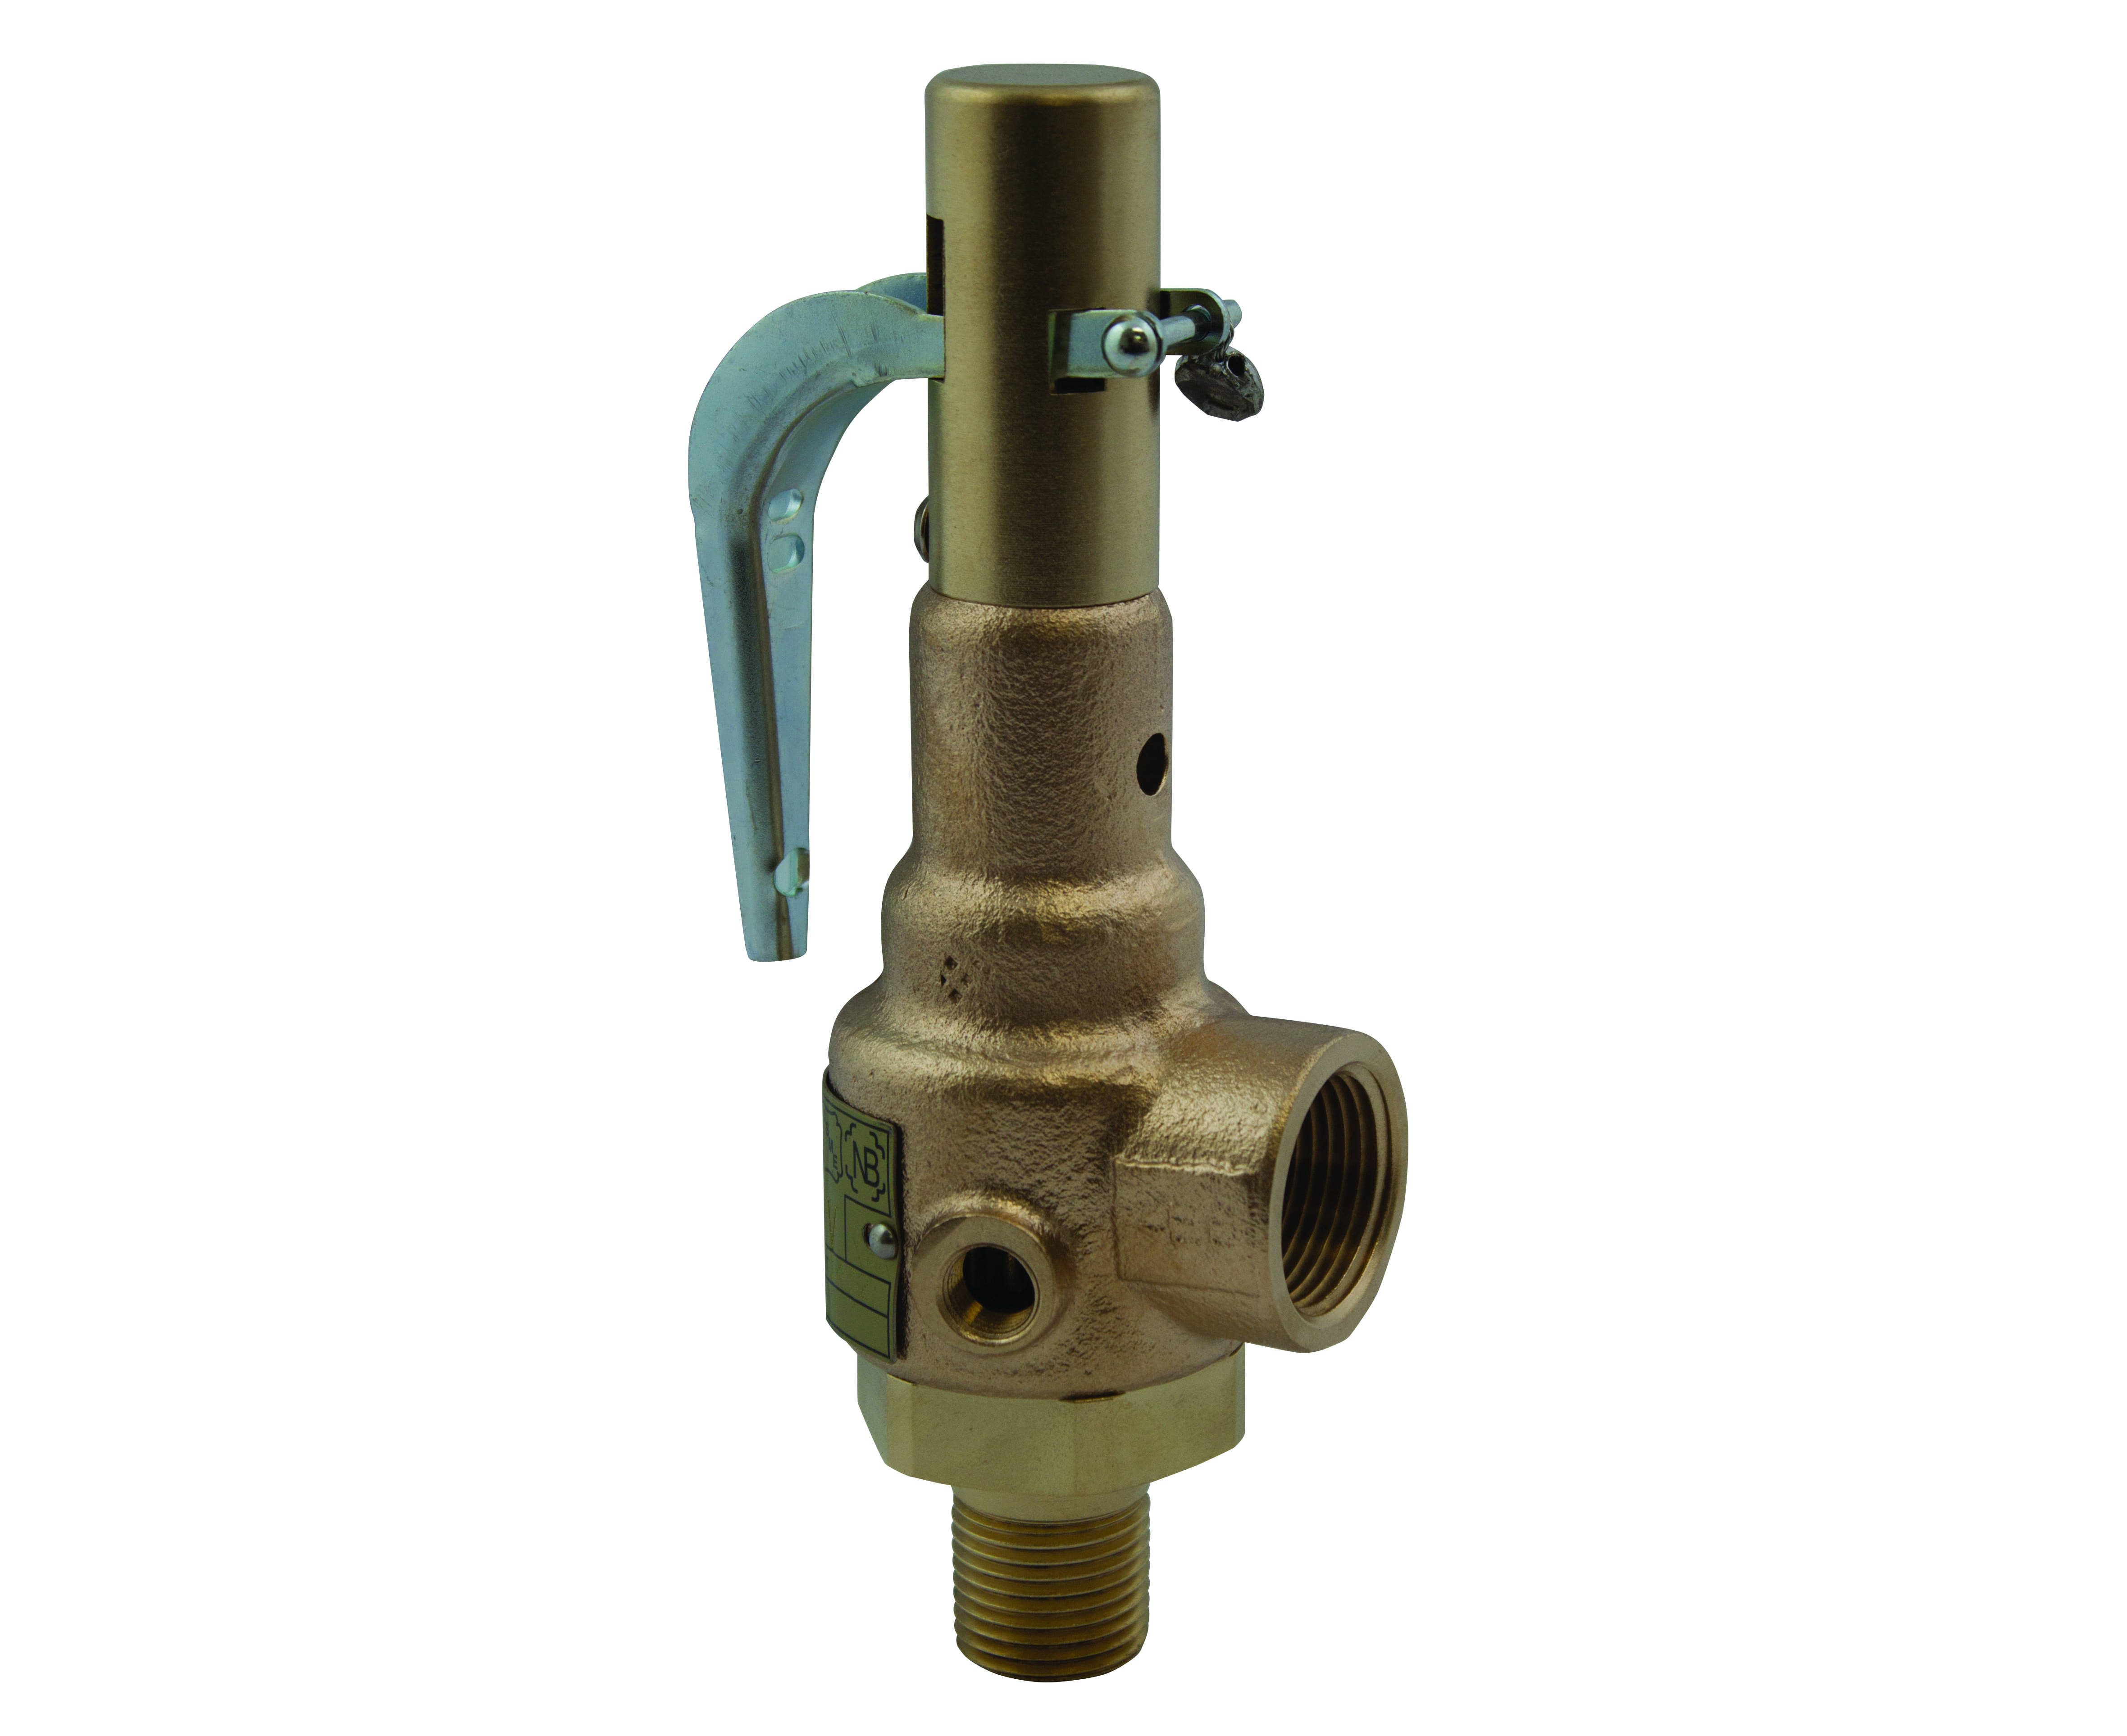 Preview image for Apollo ASME Sec I Steam Bronze Safety Relief Valves with Brass Trim, Teflon Seat, CE/PED Compliant, 1-1/4" x 1-1/2" (MNPT x FNPT)